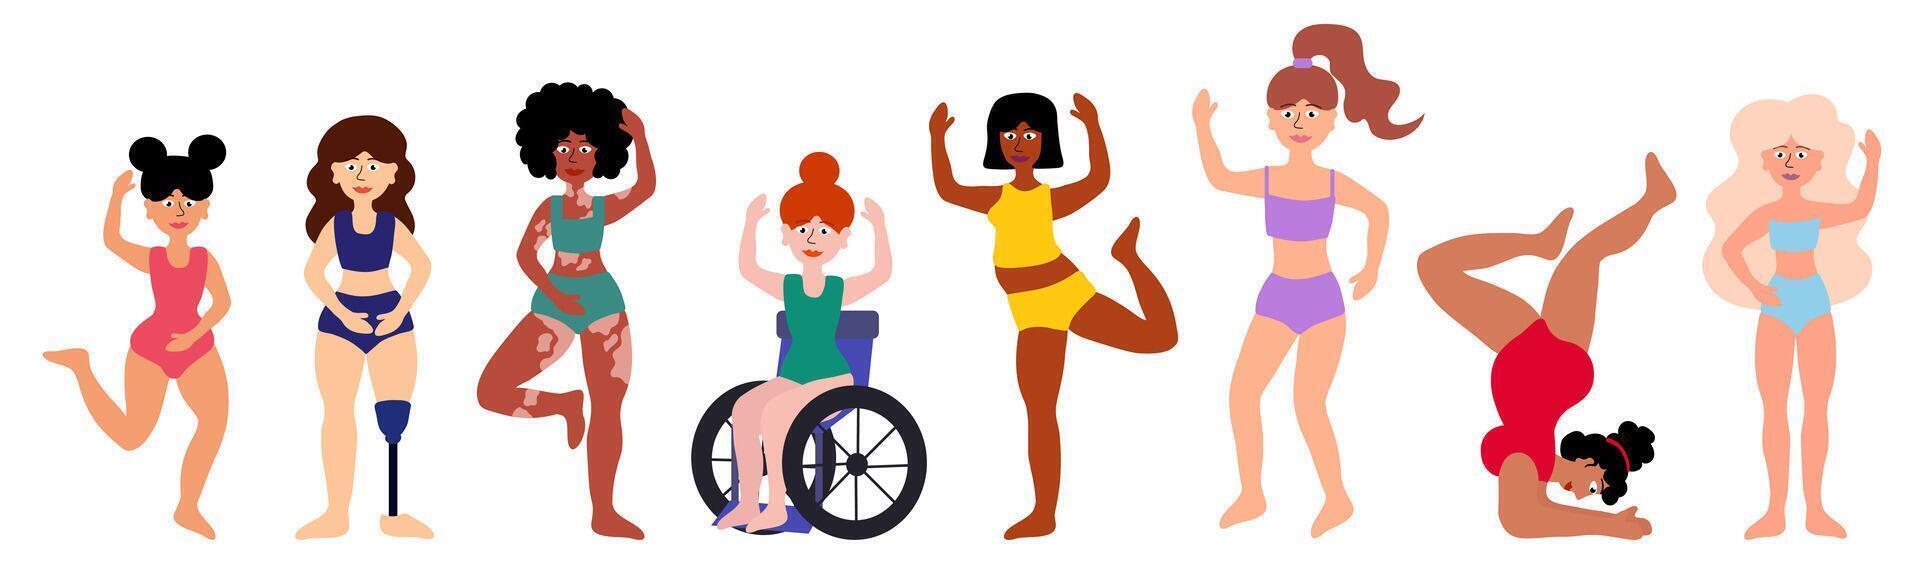 Body positive concept. Women of different ages, skin colors, ethnic groups, body types. Disability, vitiligo, prosthesis. Girls in swimsuits standing together. Cartoon flat vector illustration.